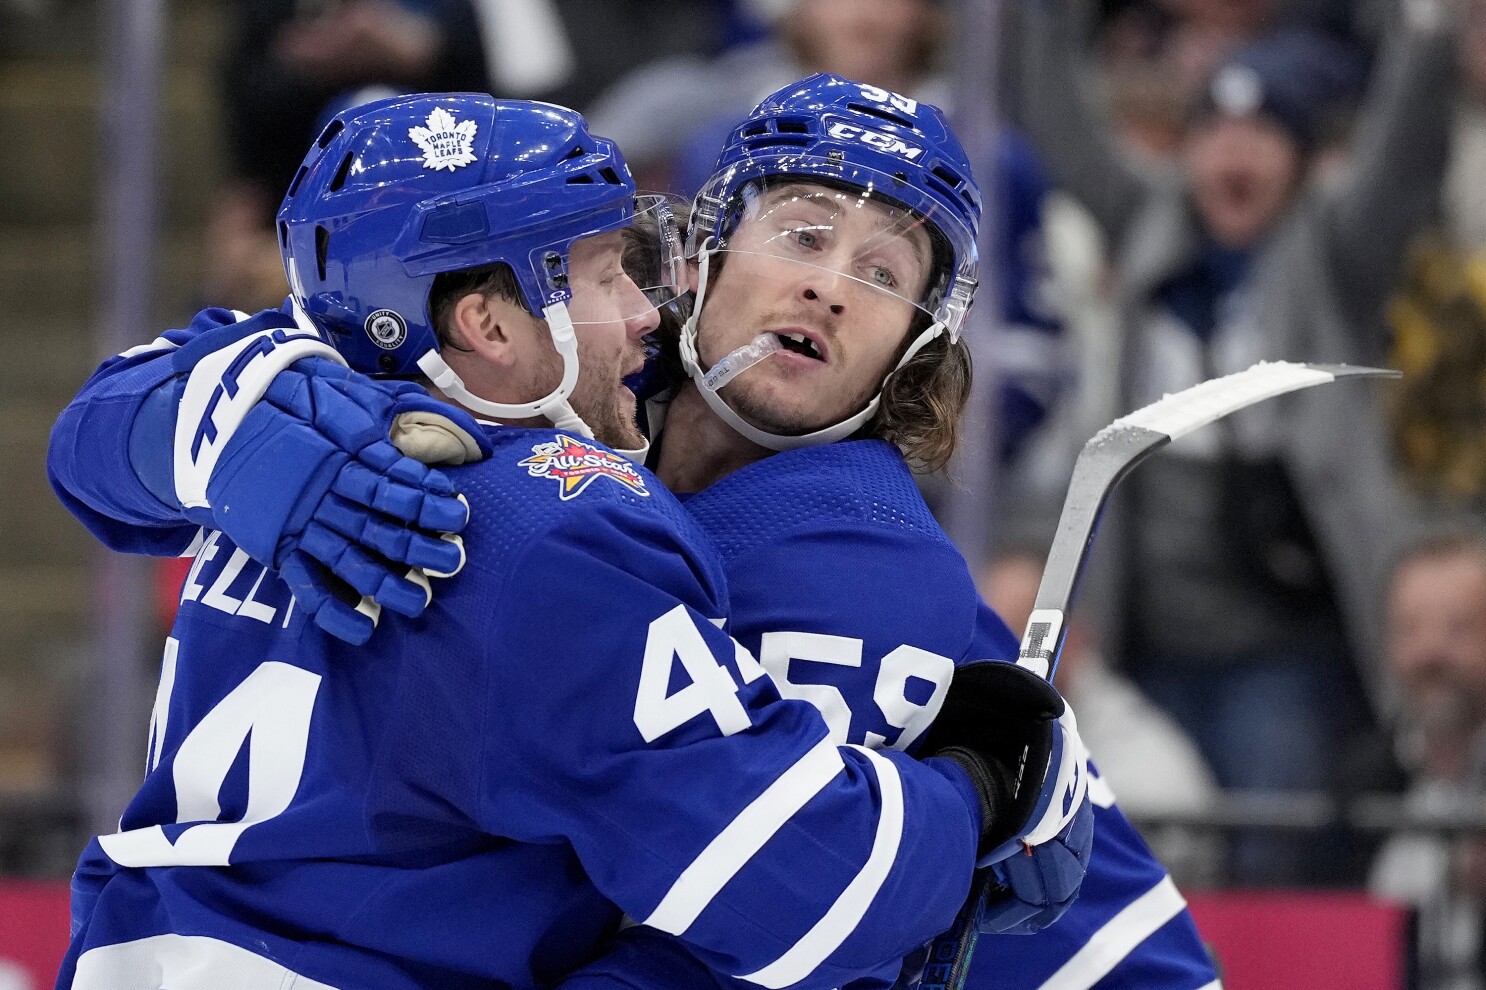 SHOULD MAPLE LEAFS BE CONCERNED ABOUT MATTHEWS' SCORING DECLINE? 